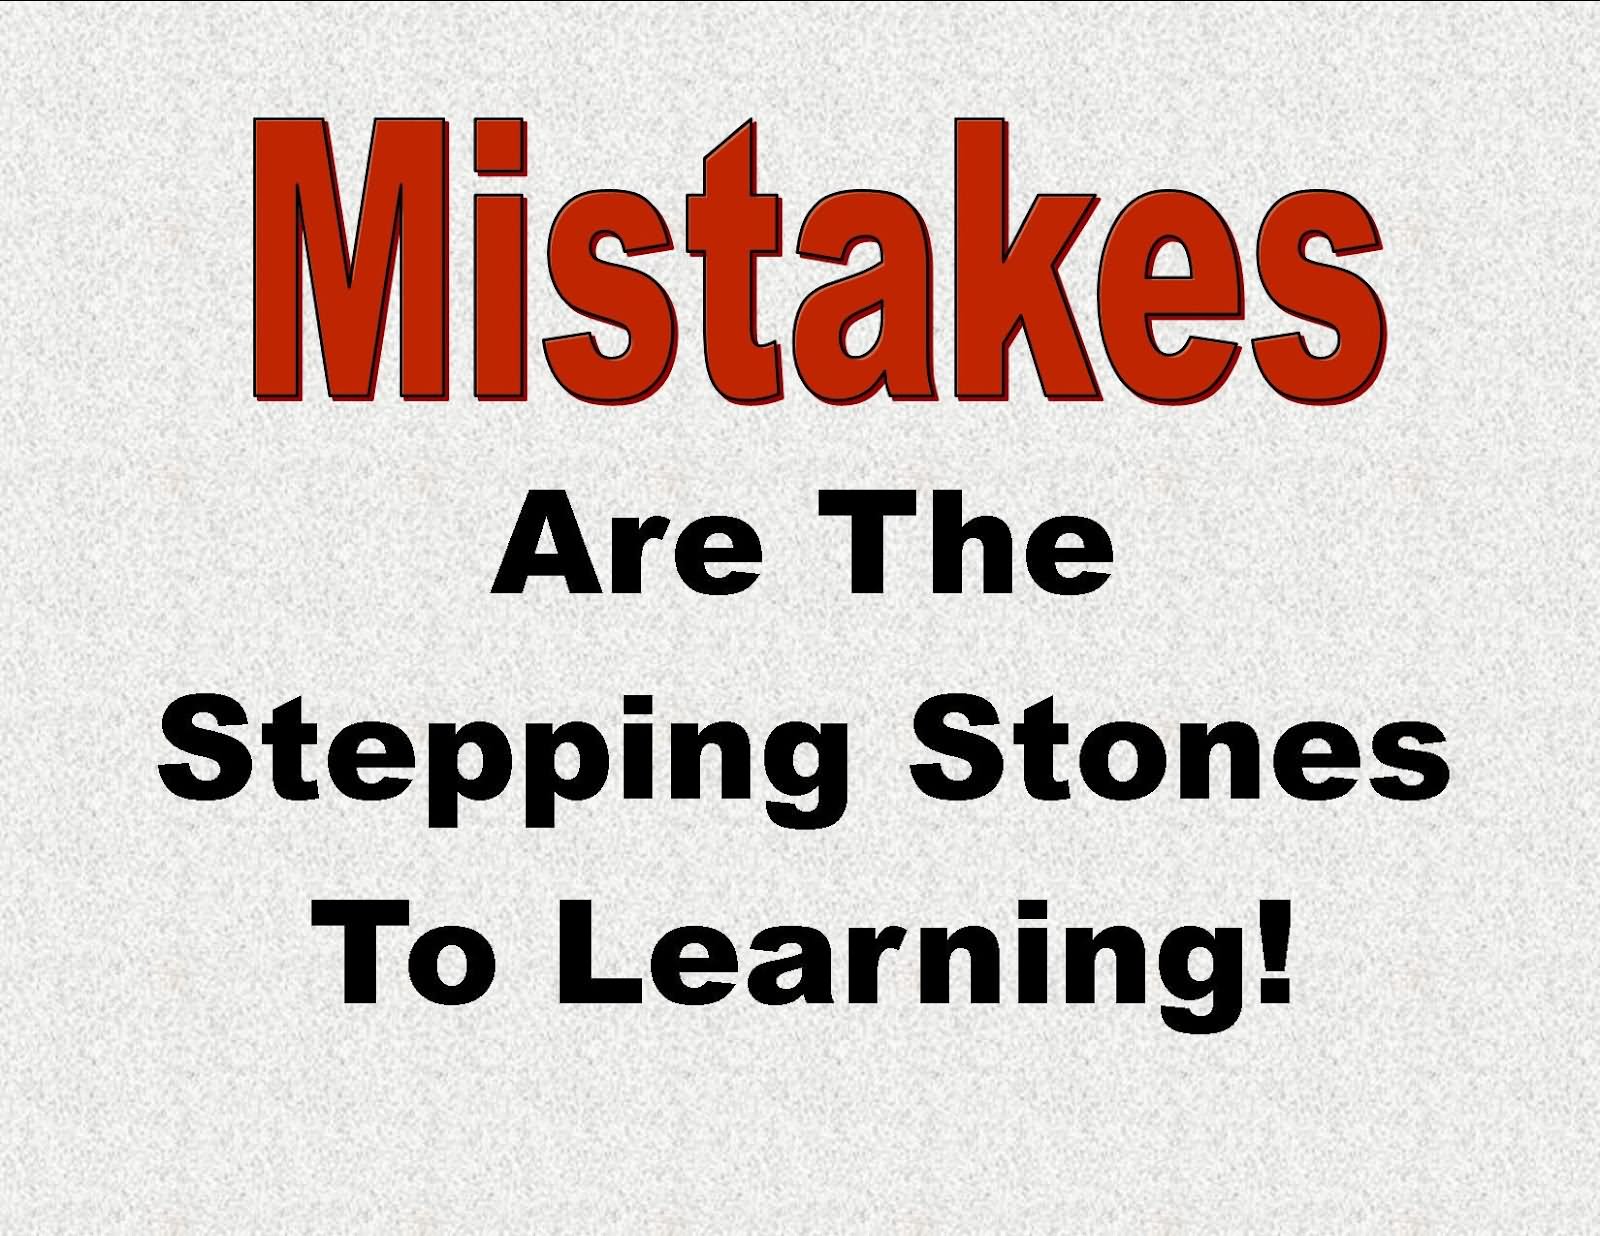 Mistakes are the stepping stones to learning.